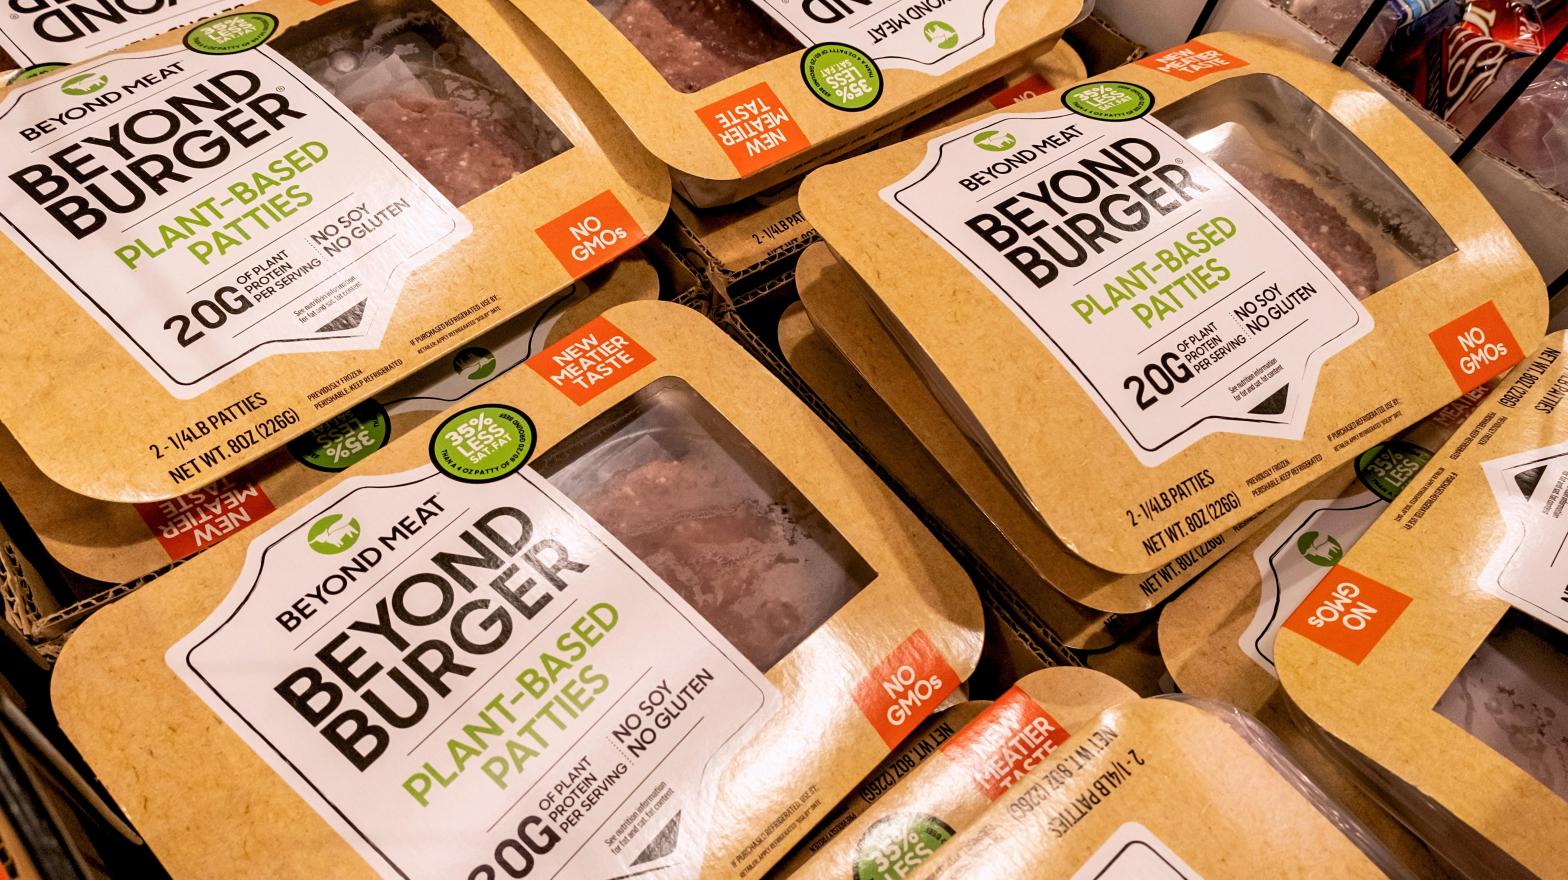 Beyond Meat grew rapidly over the past two years, which included the purchase of a Pennsylvania processing plant.  (Photo: calimedia, Shutterstock)